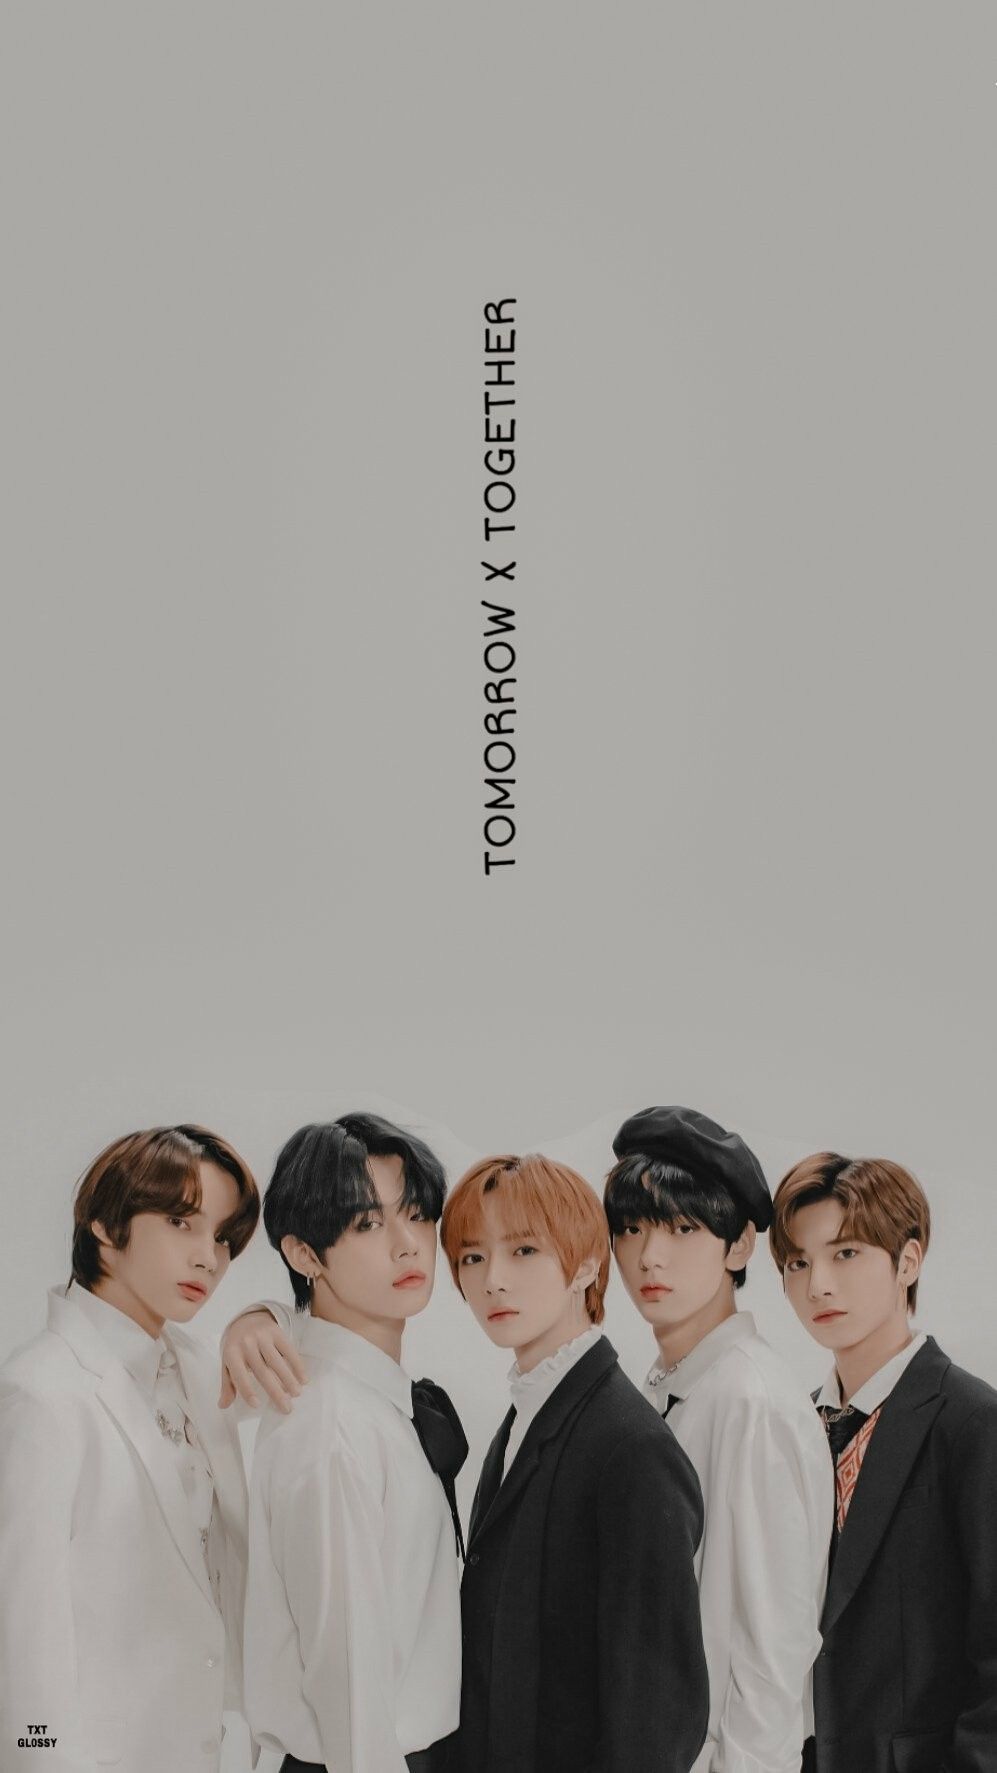 Tomorrow X Together Wallpaper Free Tomorrow X Together Background